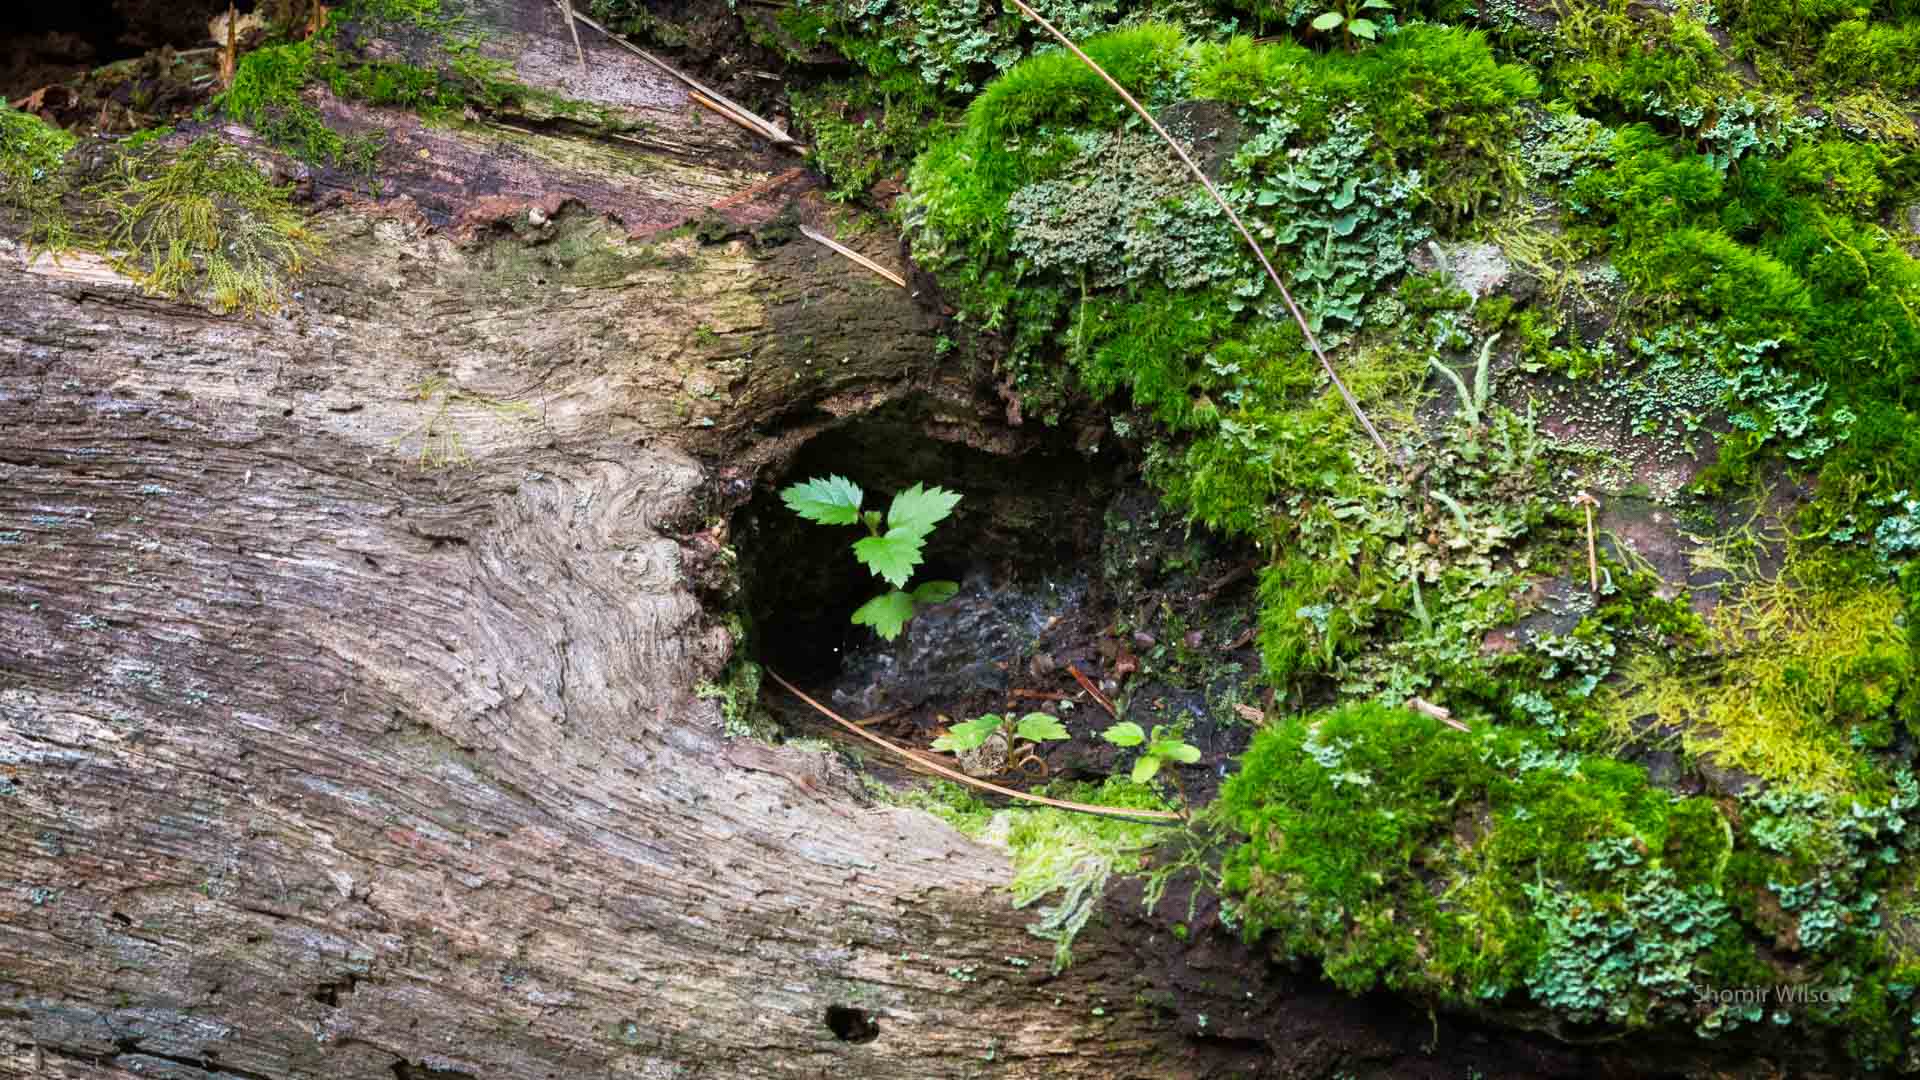 small plants and moss growing on a tree trunk